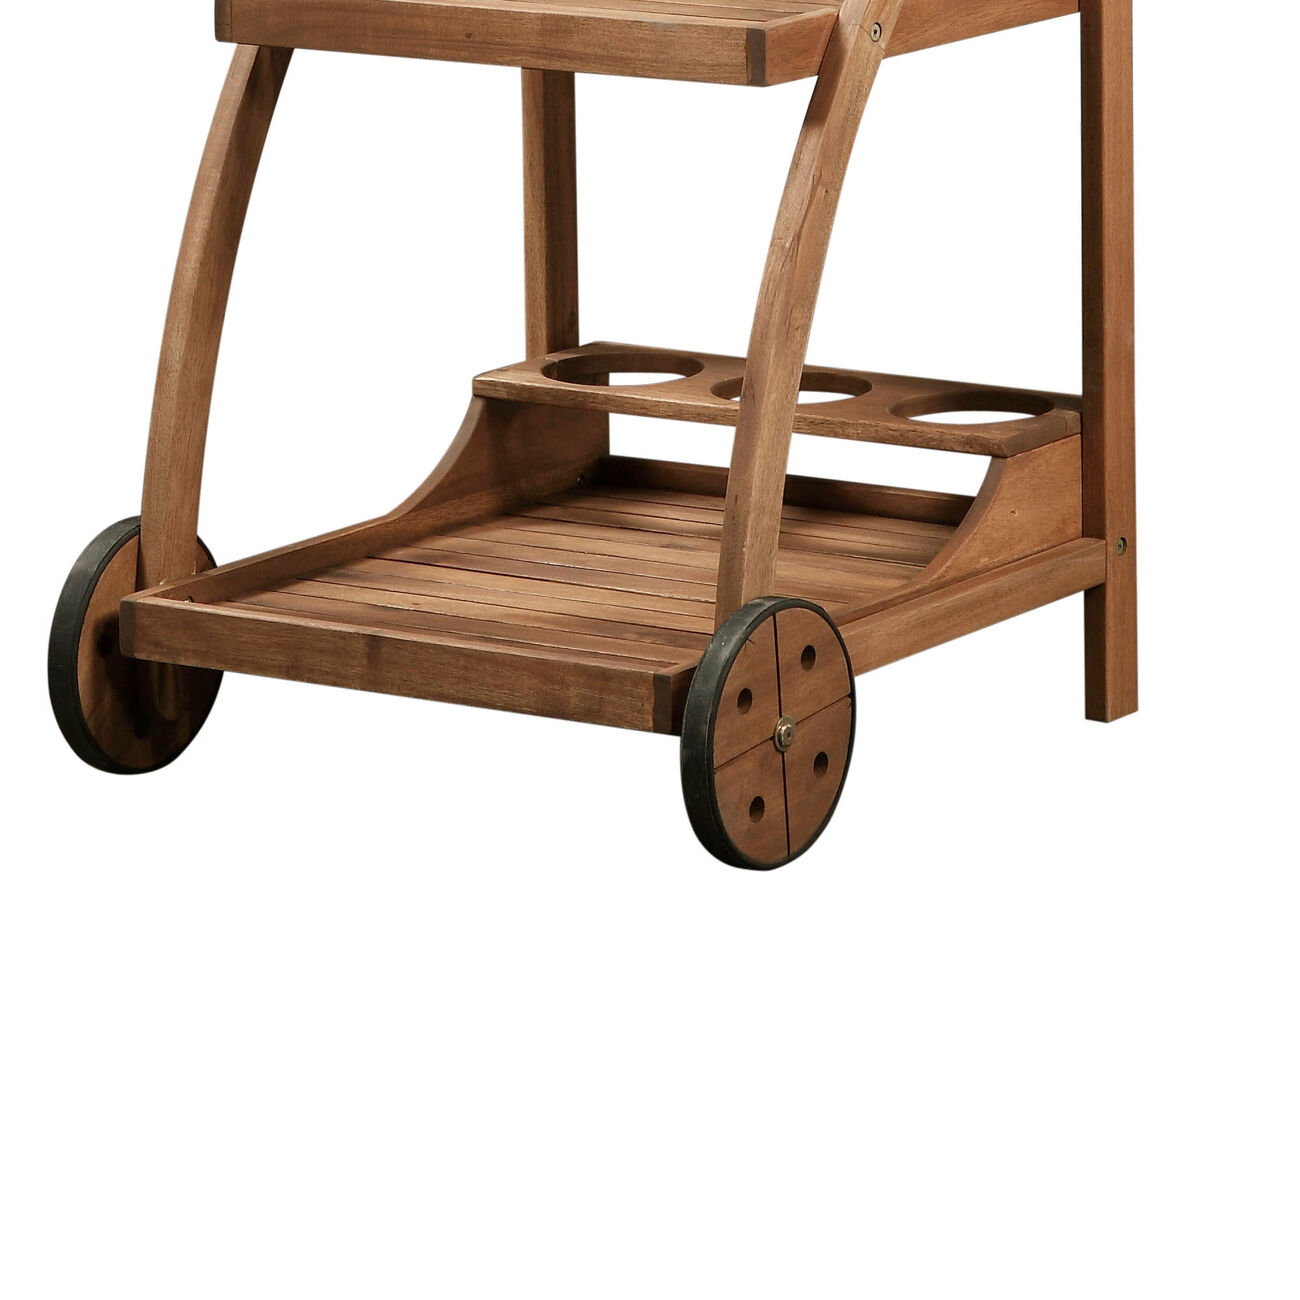 2 Shelf Wooden Trolley with Caster Wheels and Bottle Holders, Brown